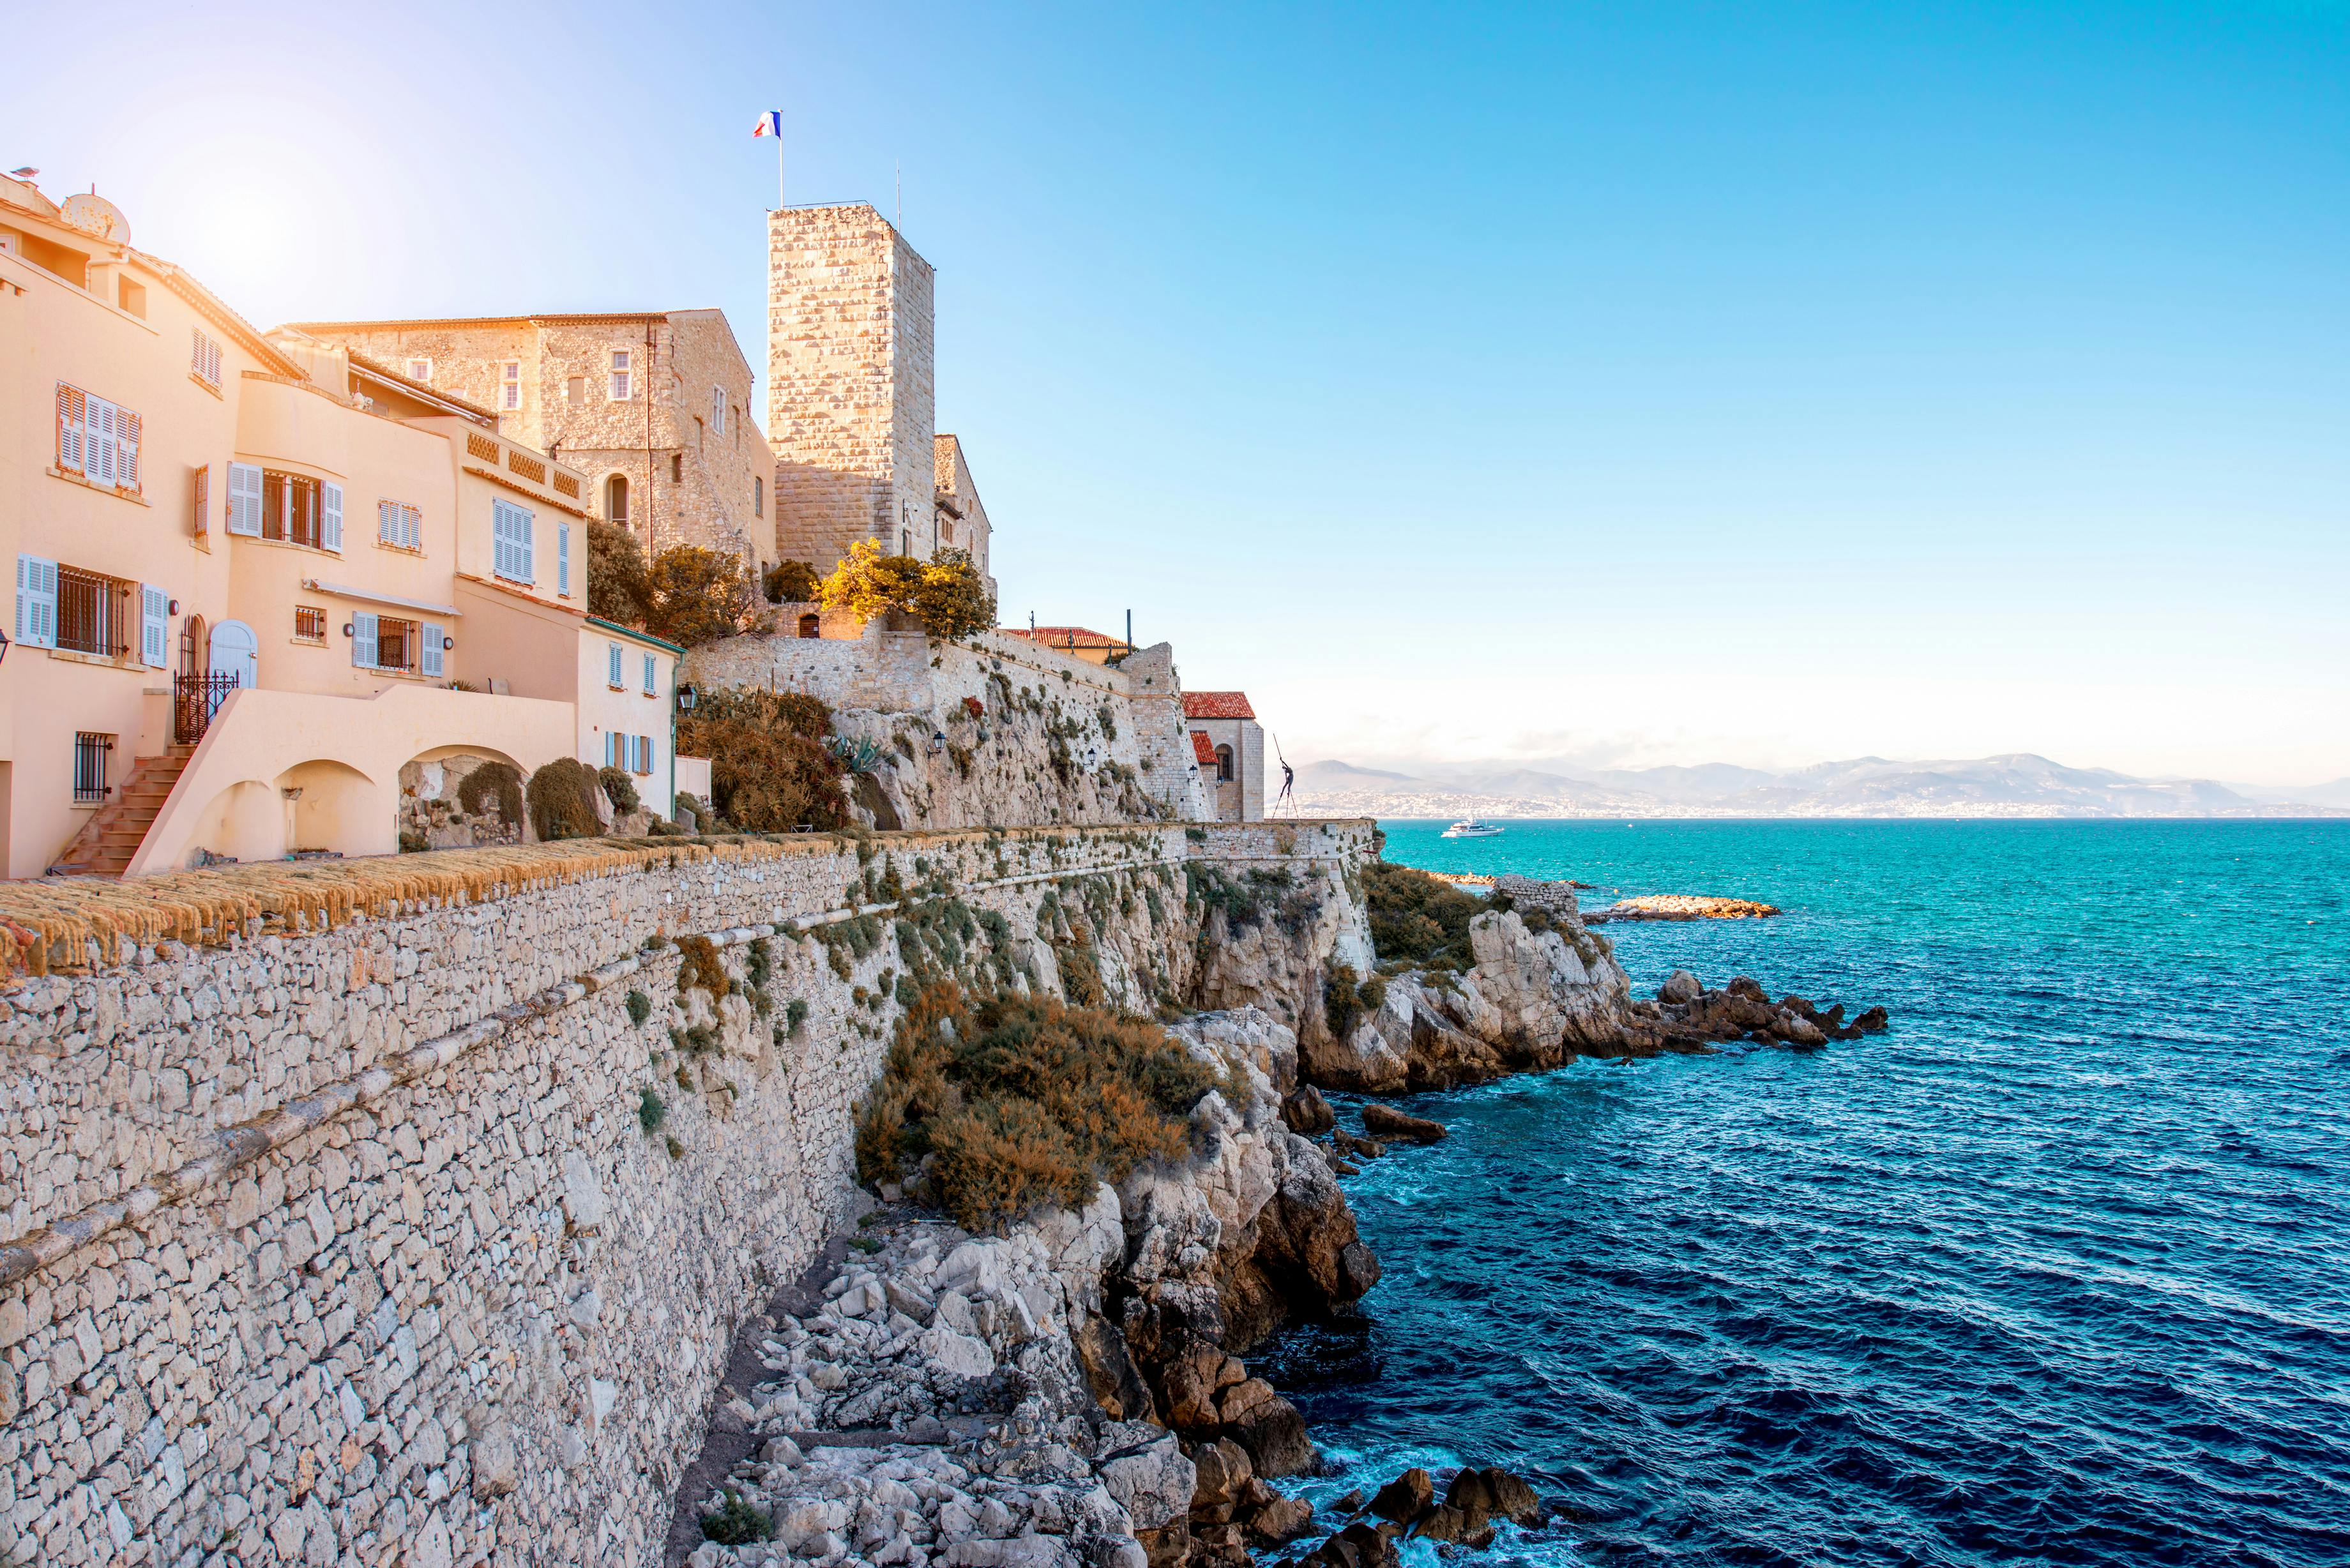 Cannes, Antibes and Saint Paul de Vence shared tour from Nice